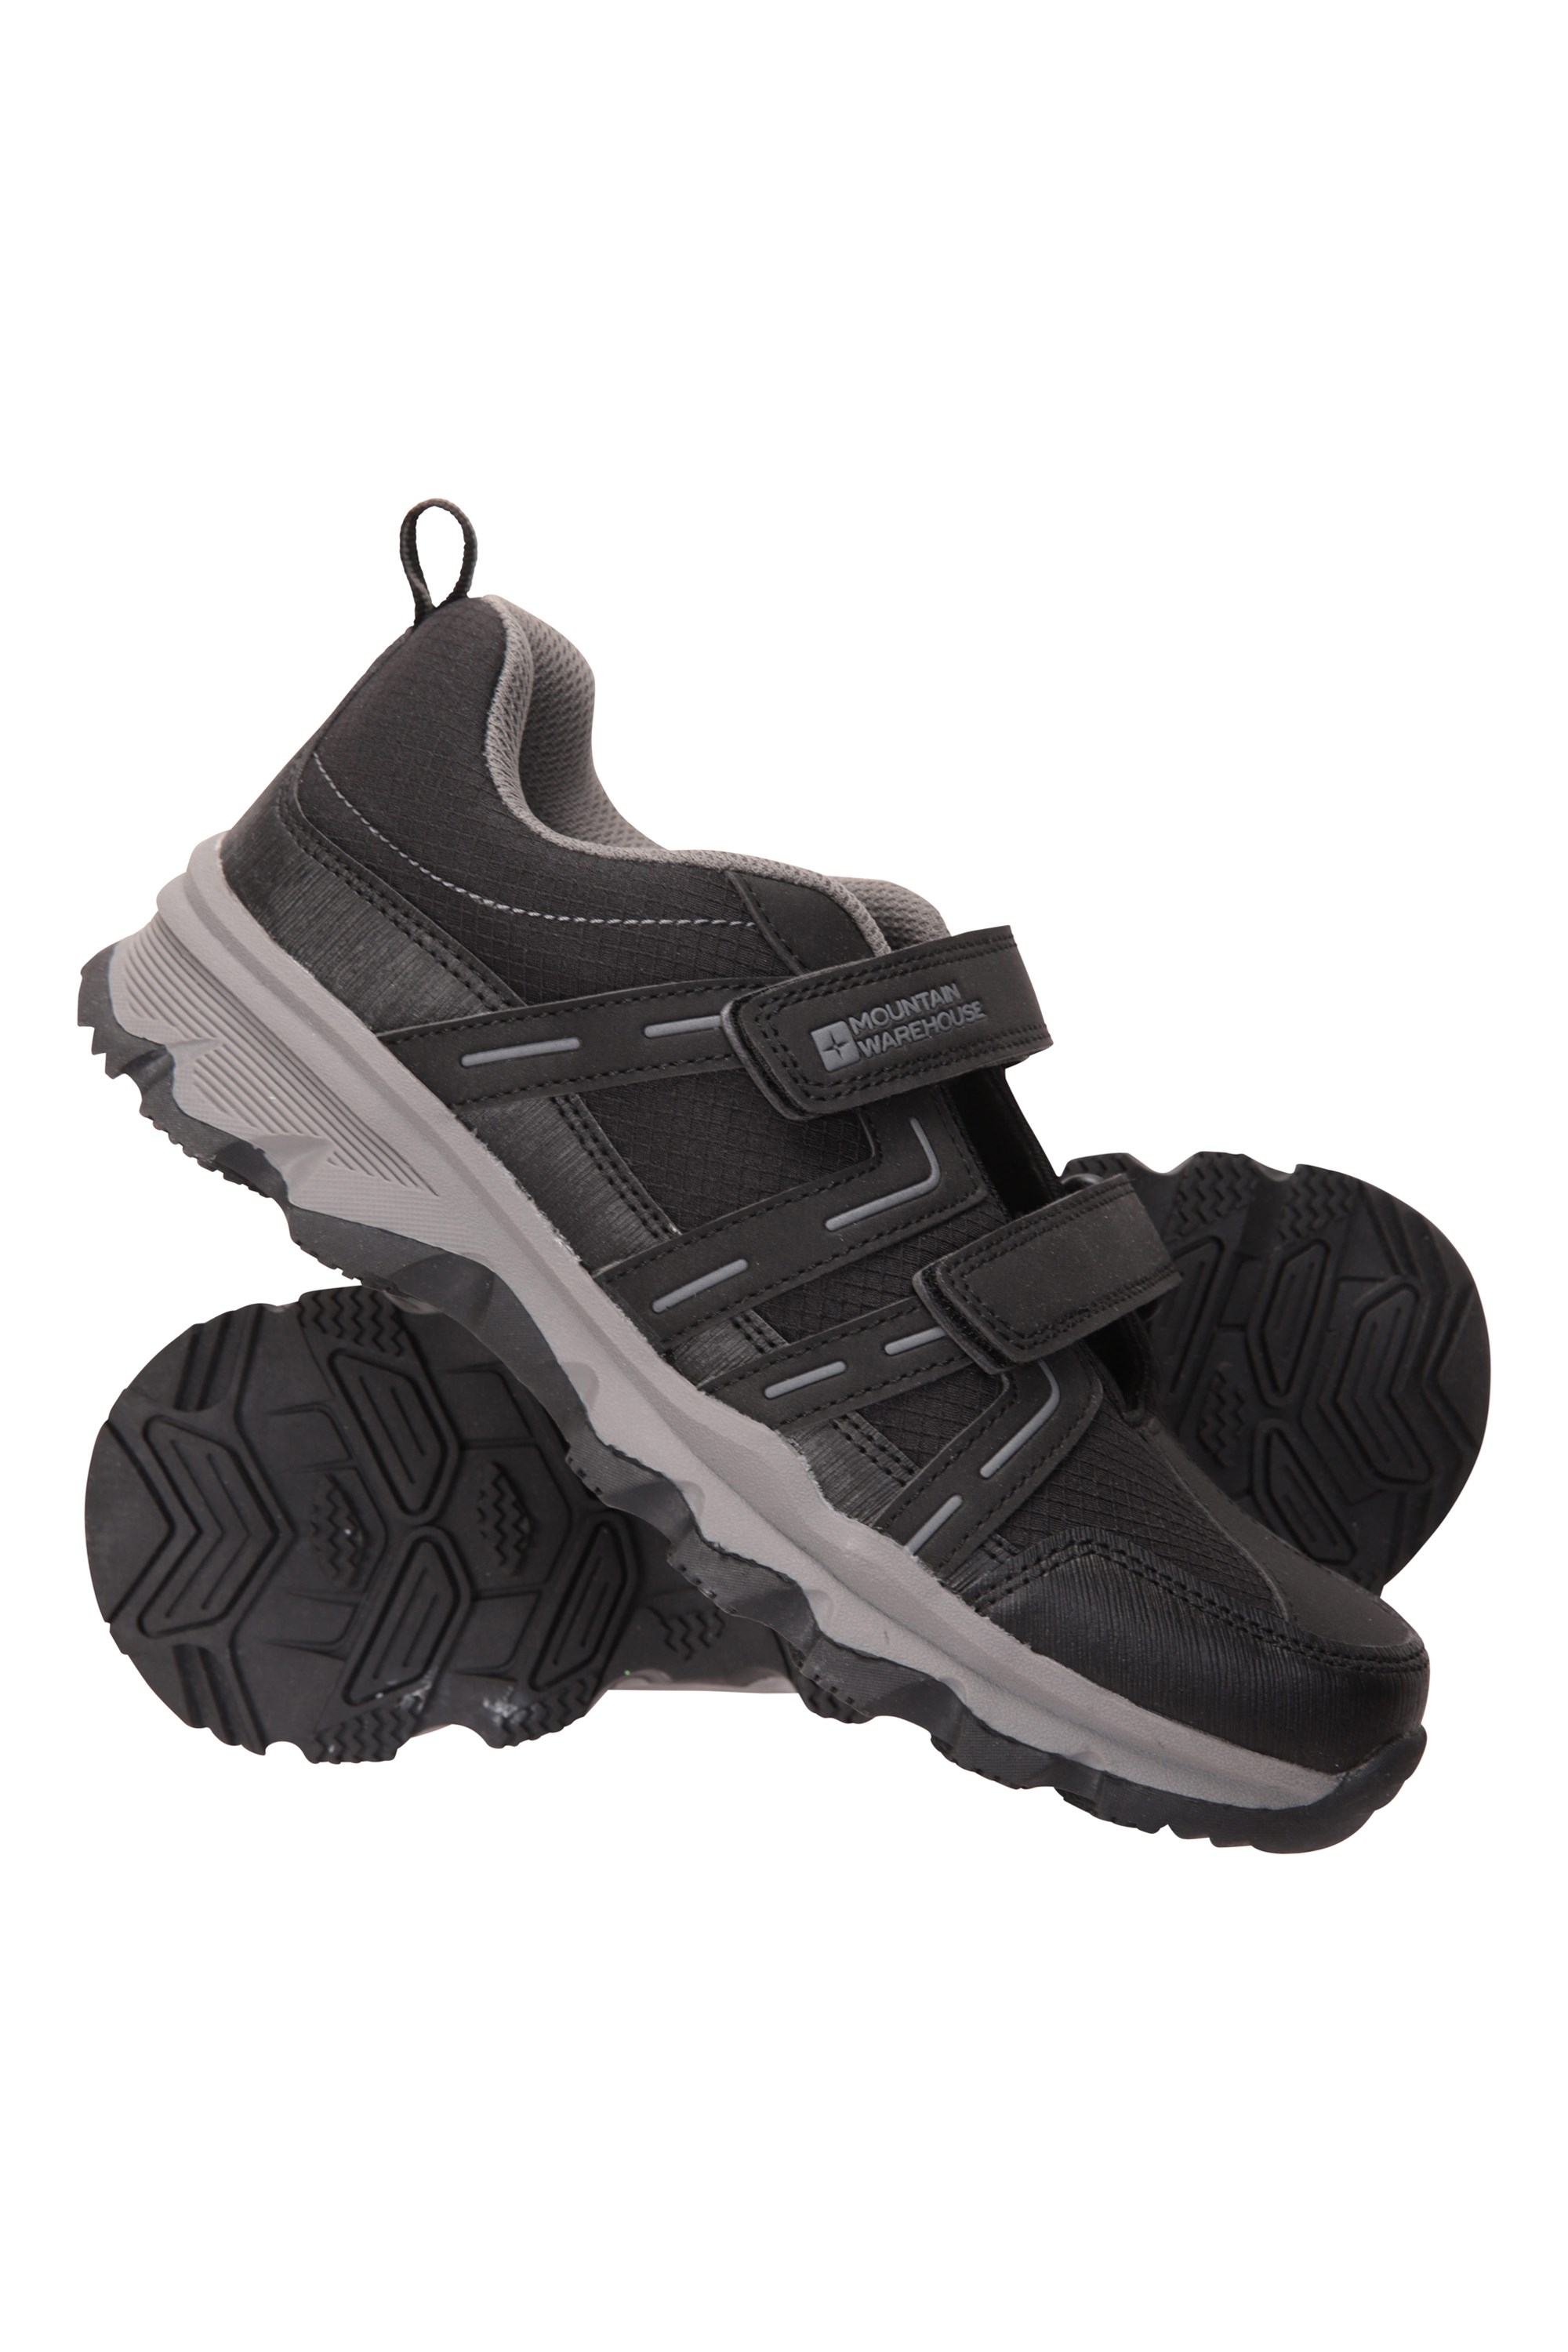 Mountain Warehouse Stampede Kids Walking Shoes Park for Camping 